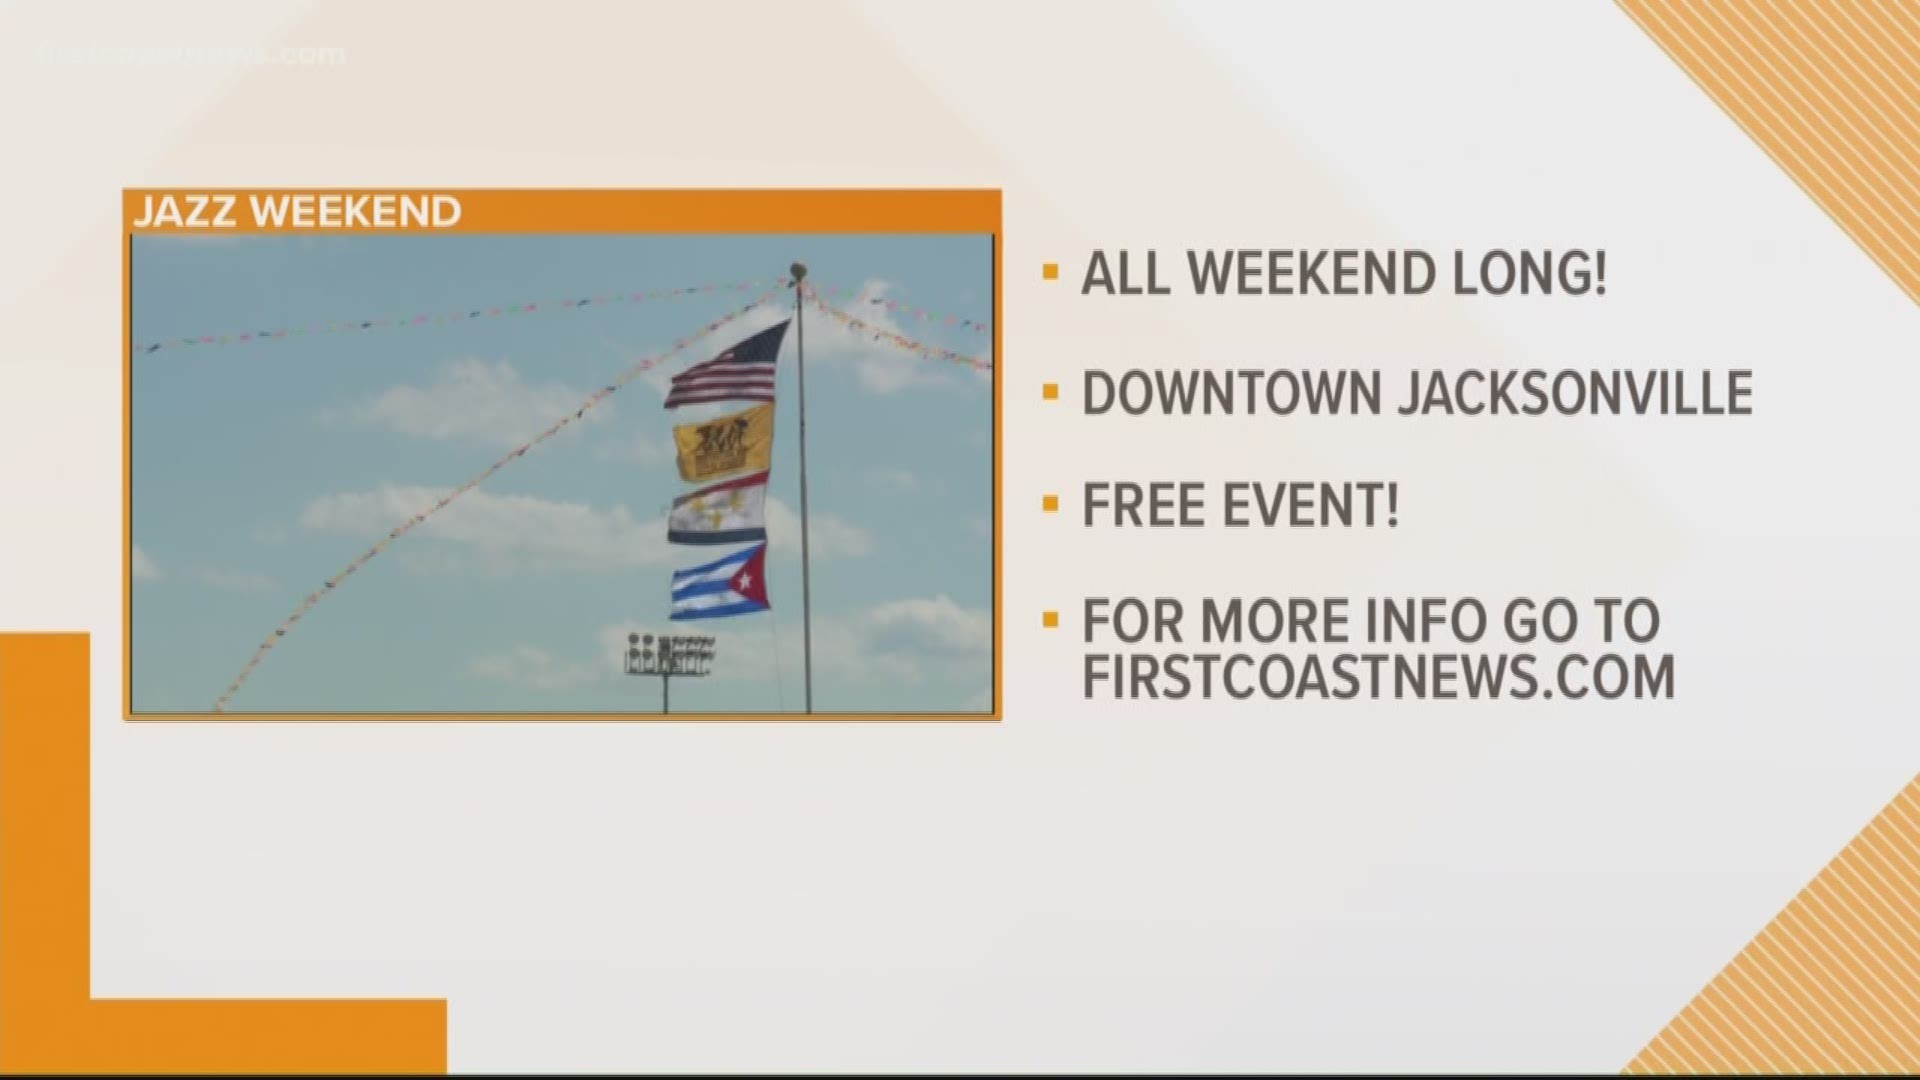 Lots of things going on this weekend on the First Coast.